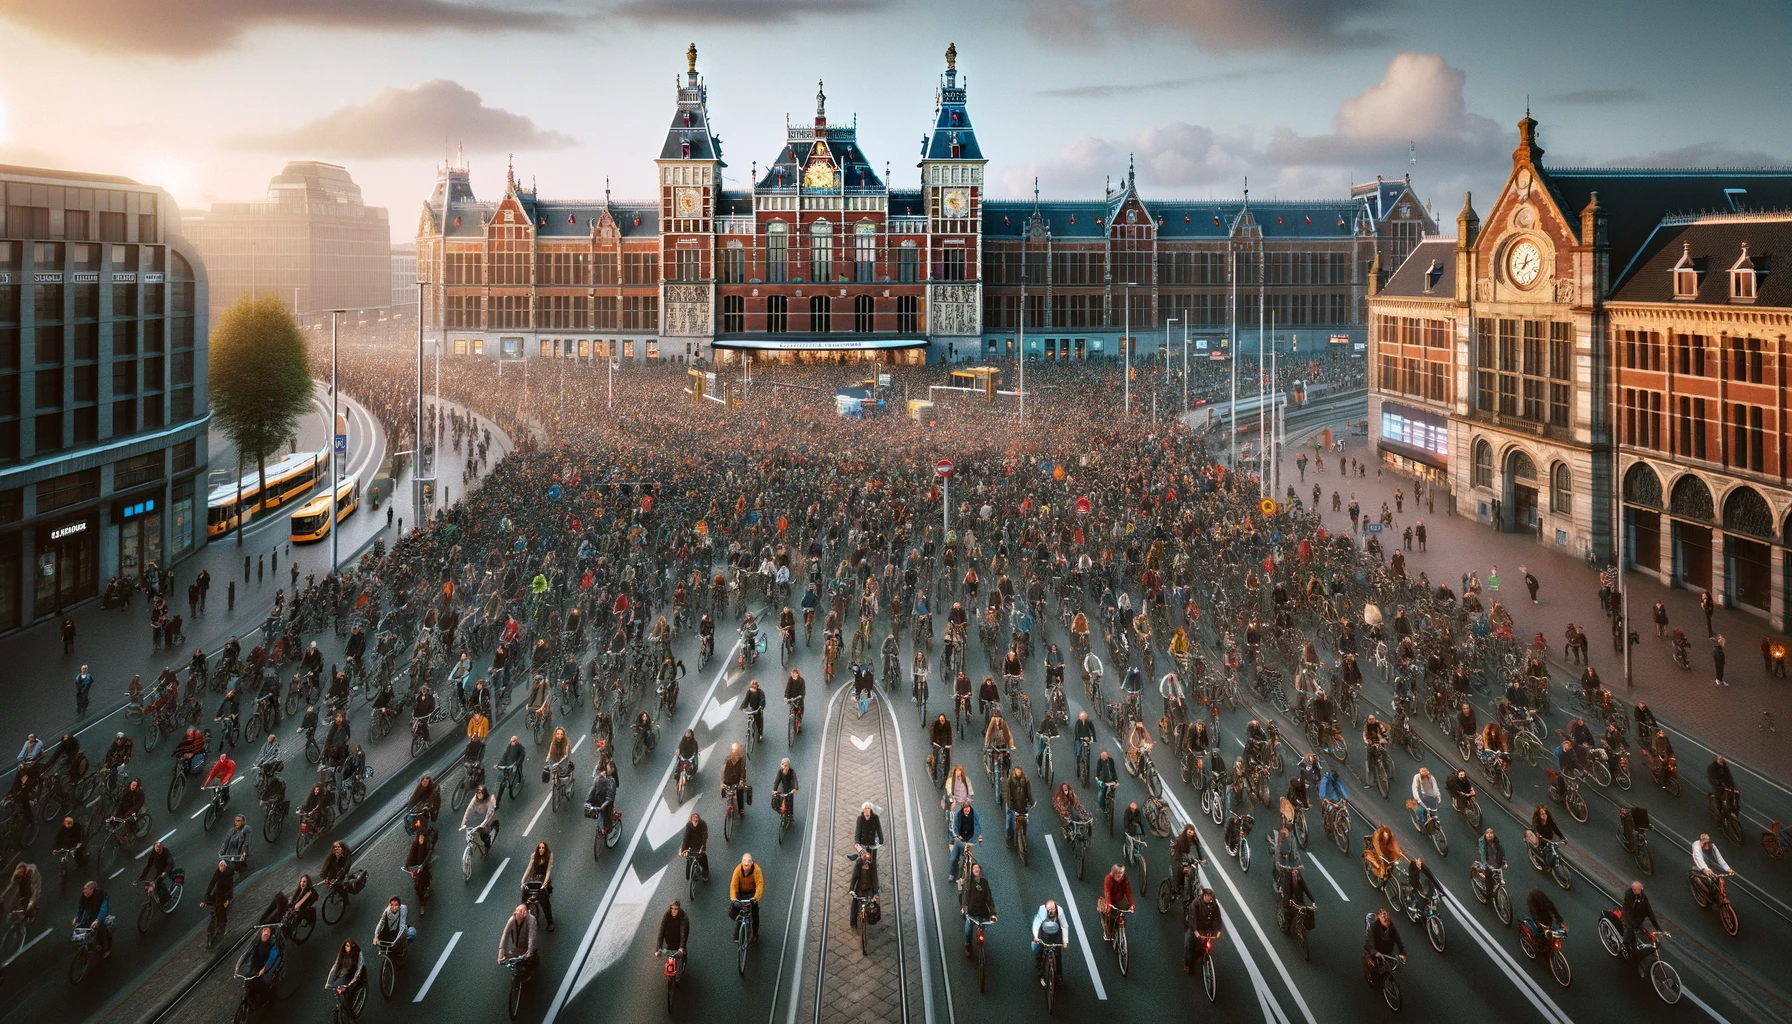 Amsterdam municipal plan for total control over private vehicles does not fit into a free society — and will not work